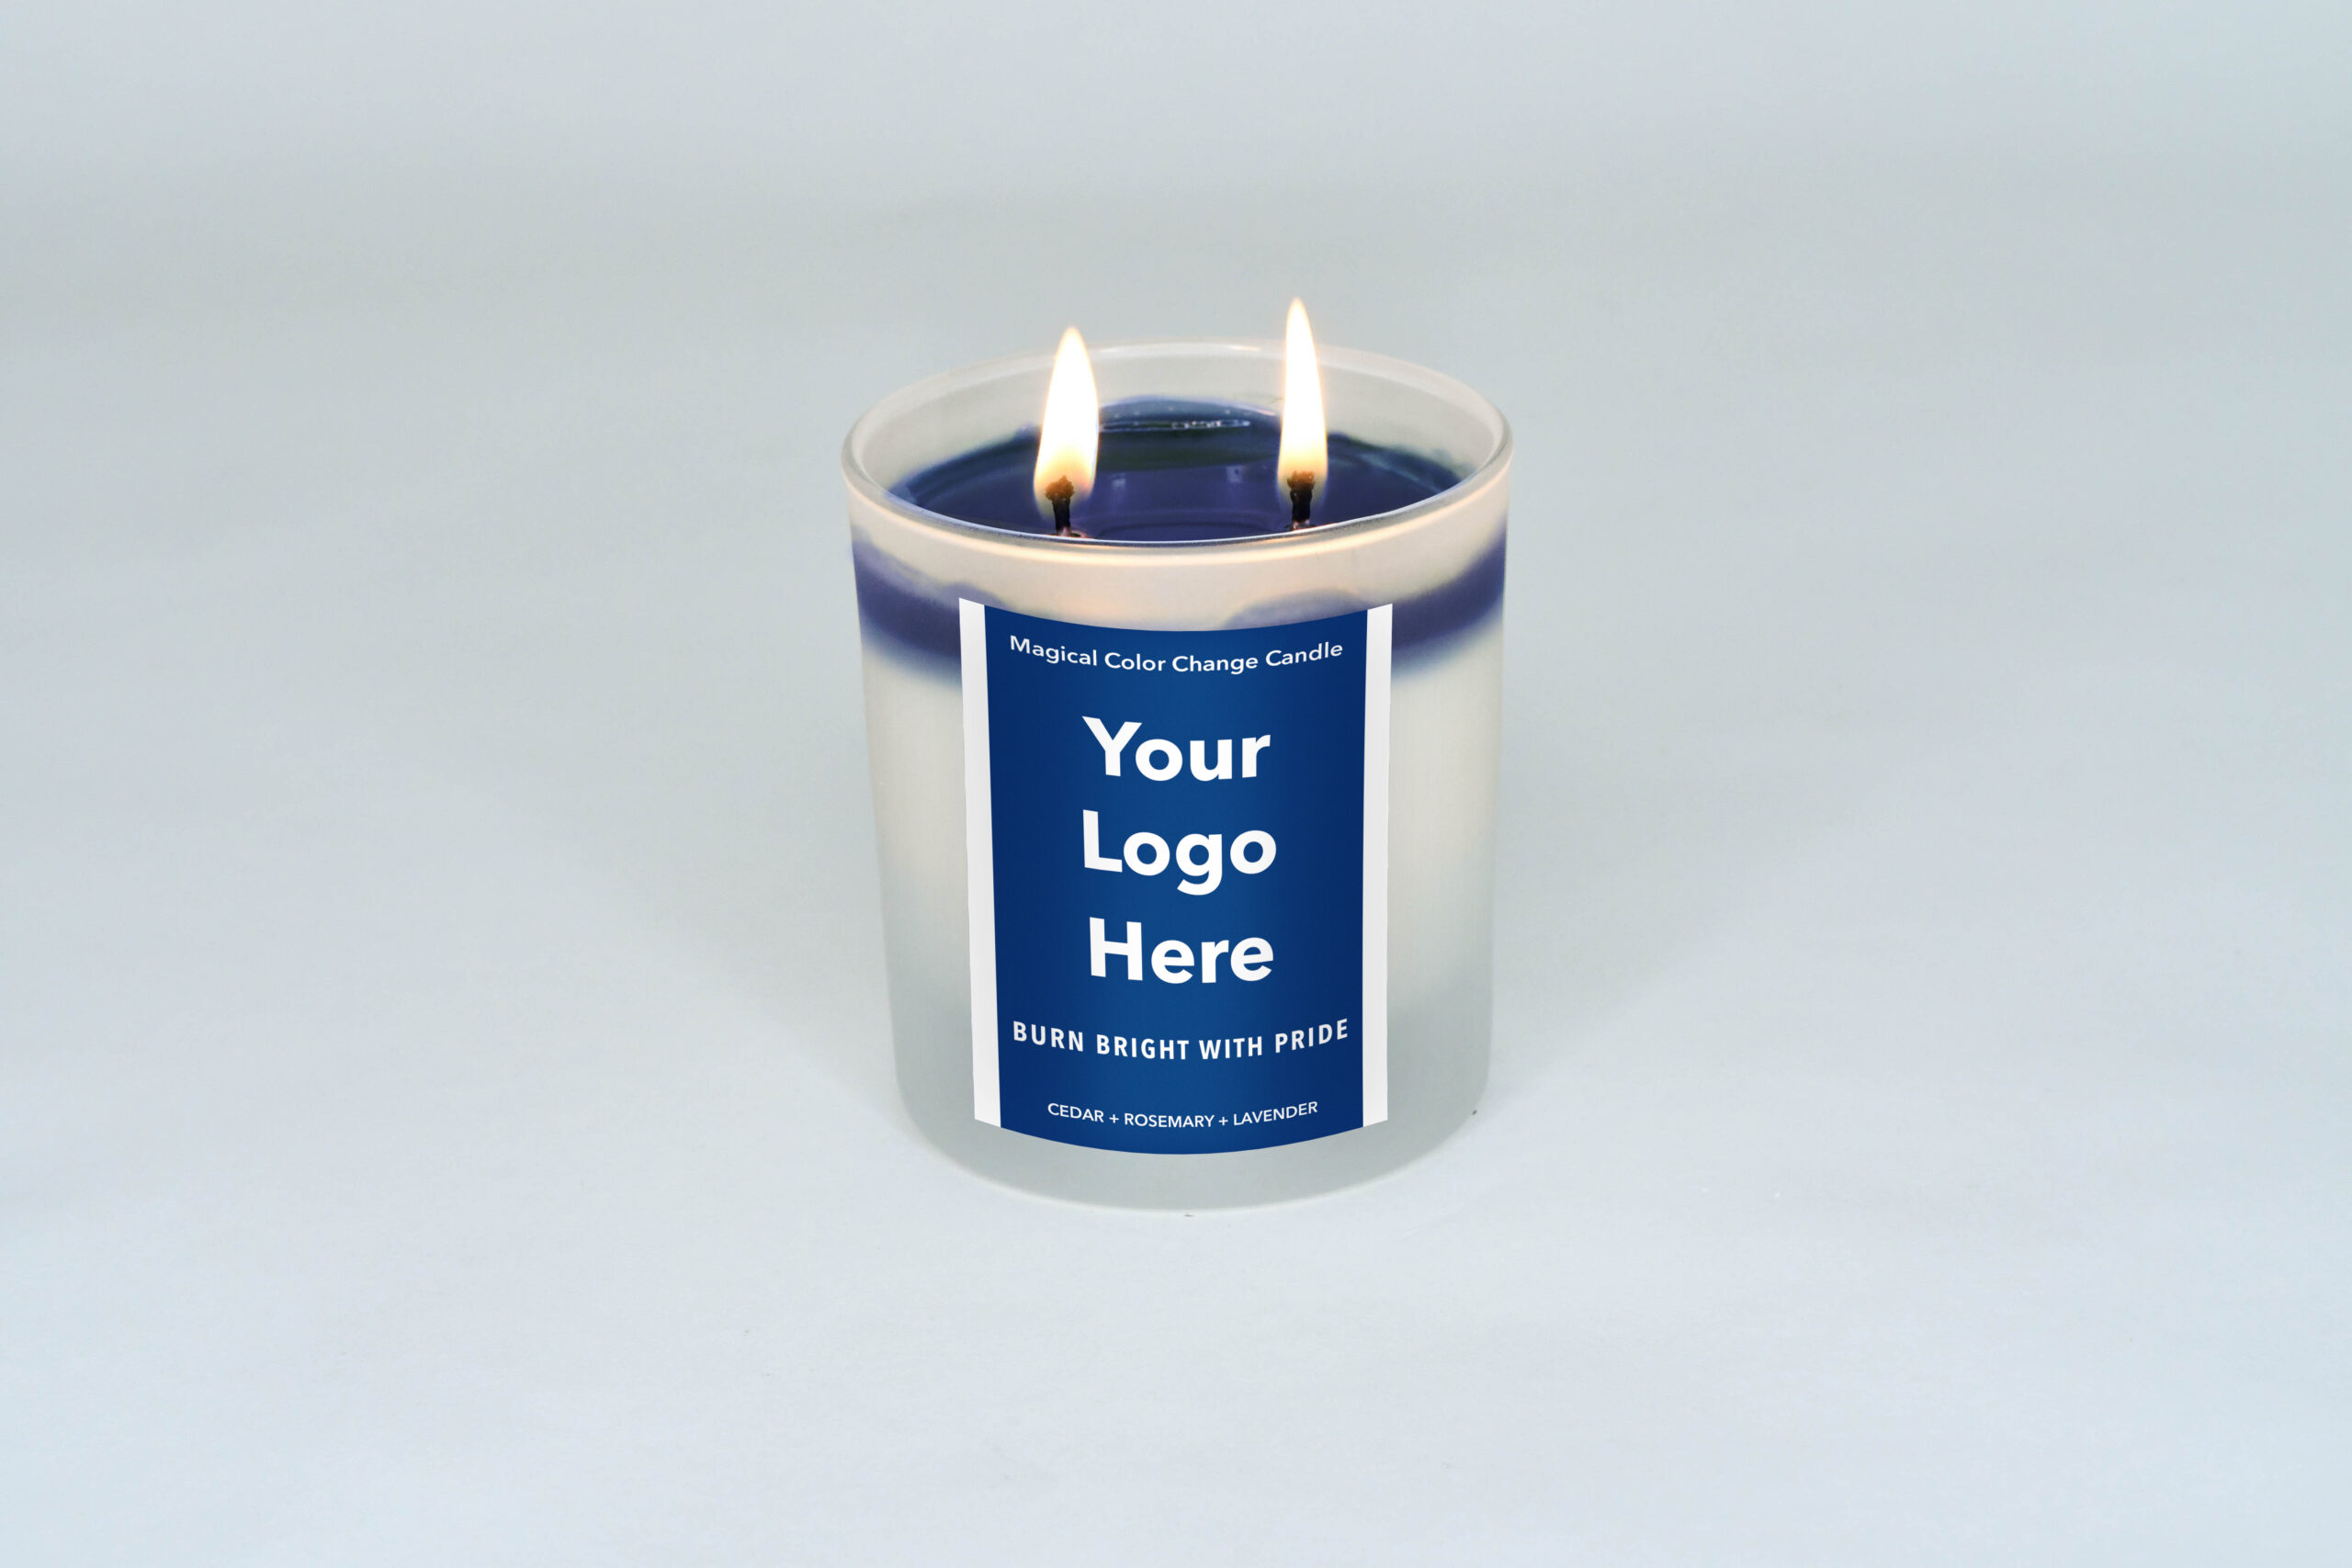 Blue candle, your logo here, lit, full wax pool